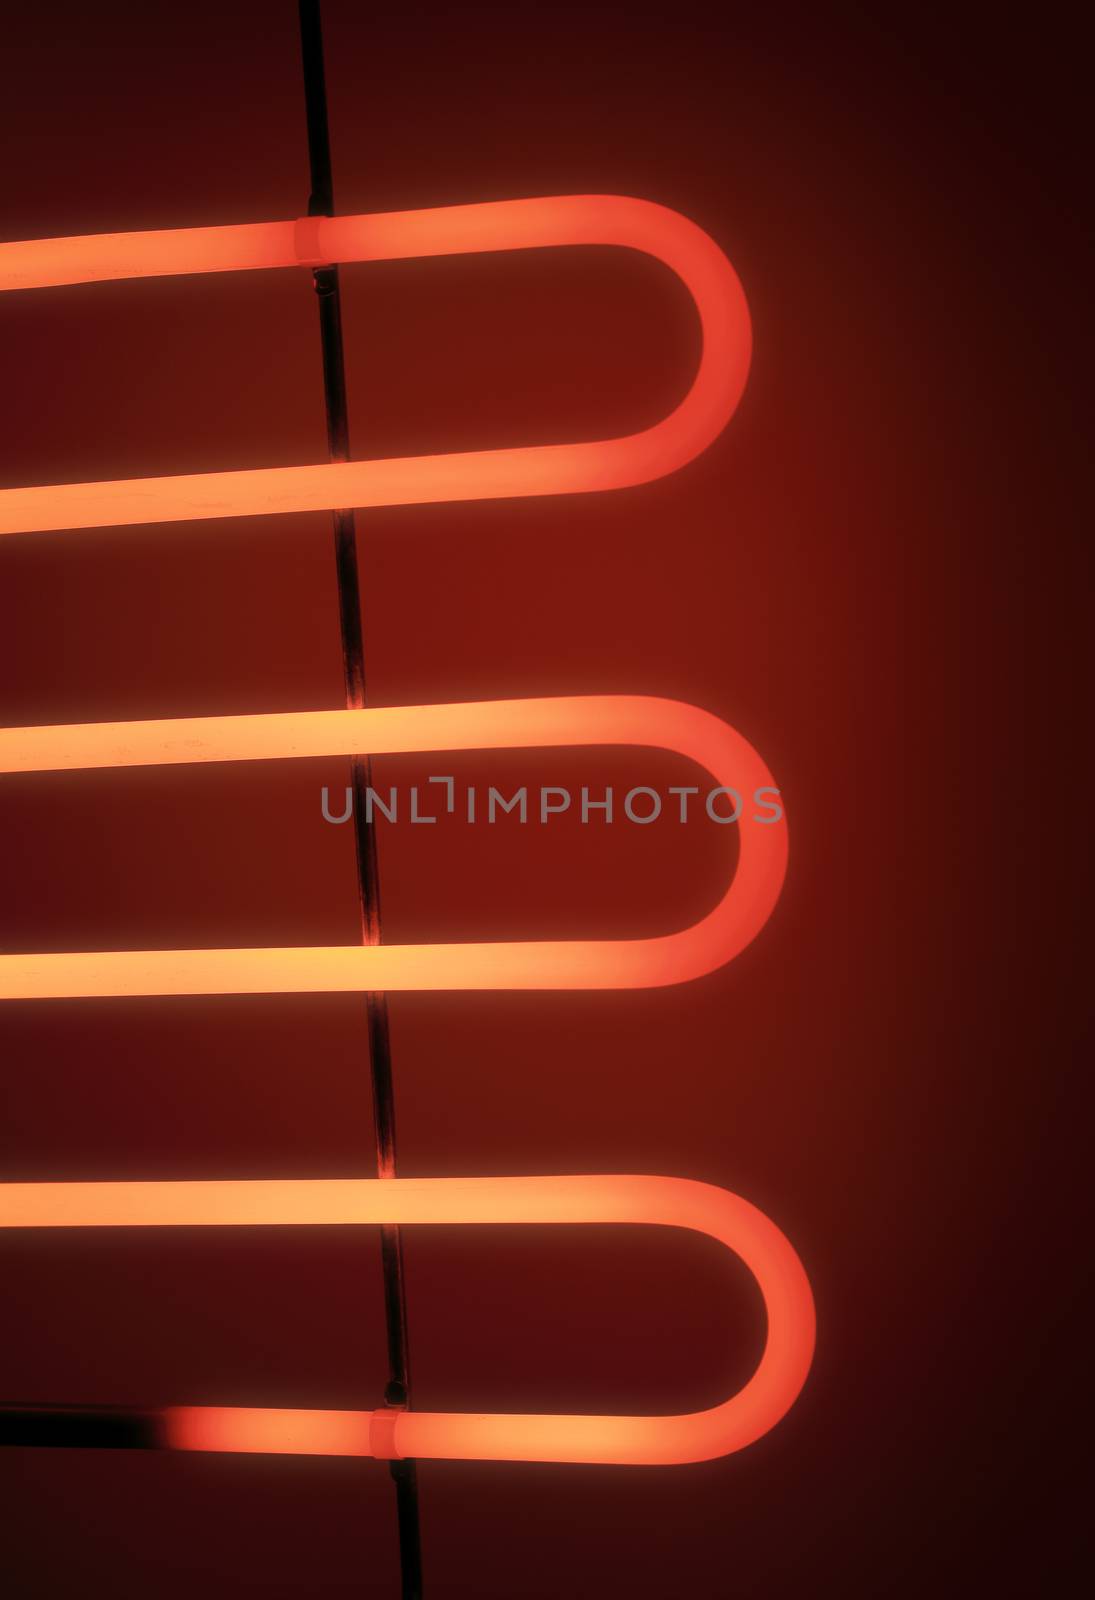 Heating element by Stocksnapper